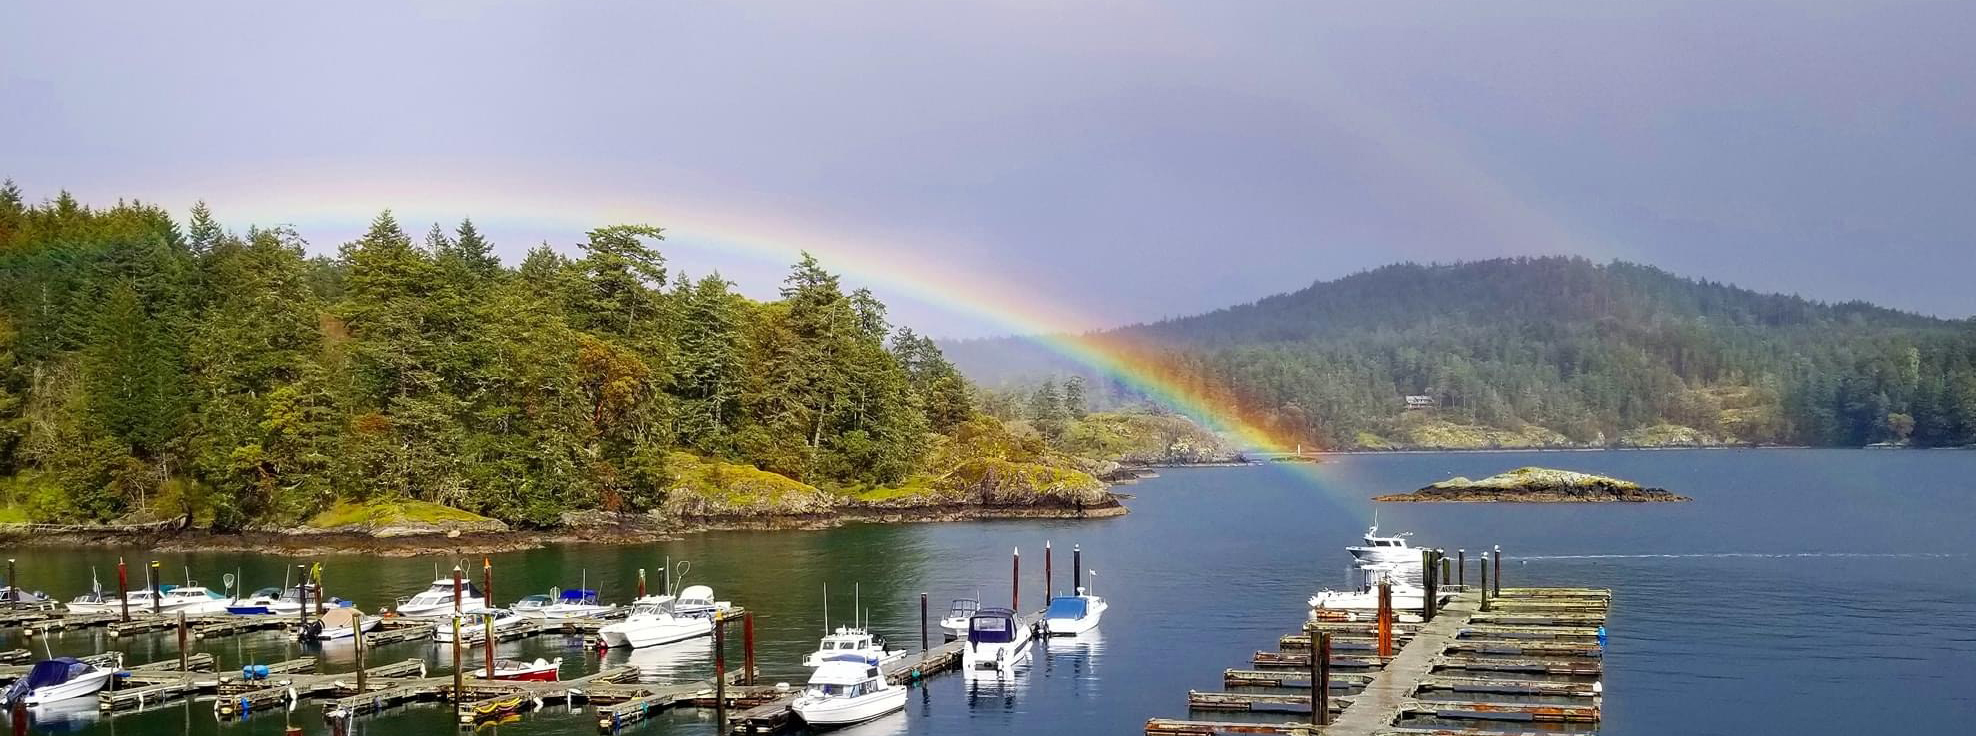 Victoria boat docks with beautiful rainbow just cresting the trees and ending in the water